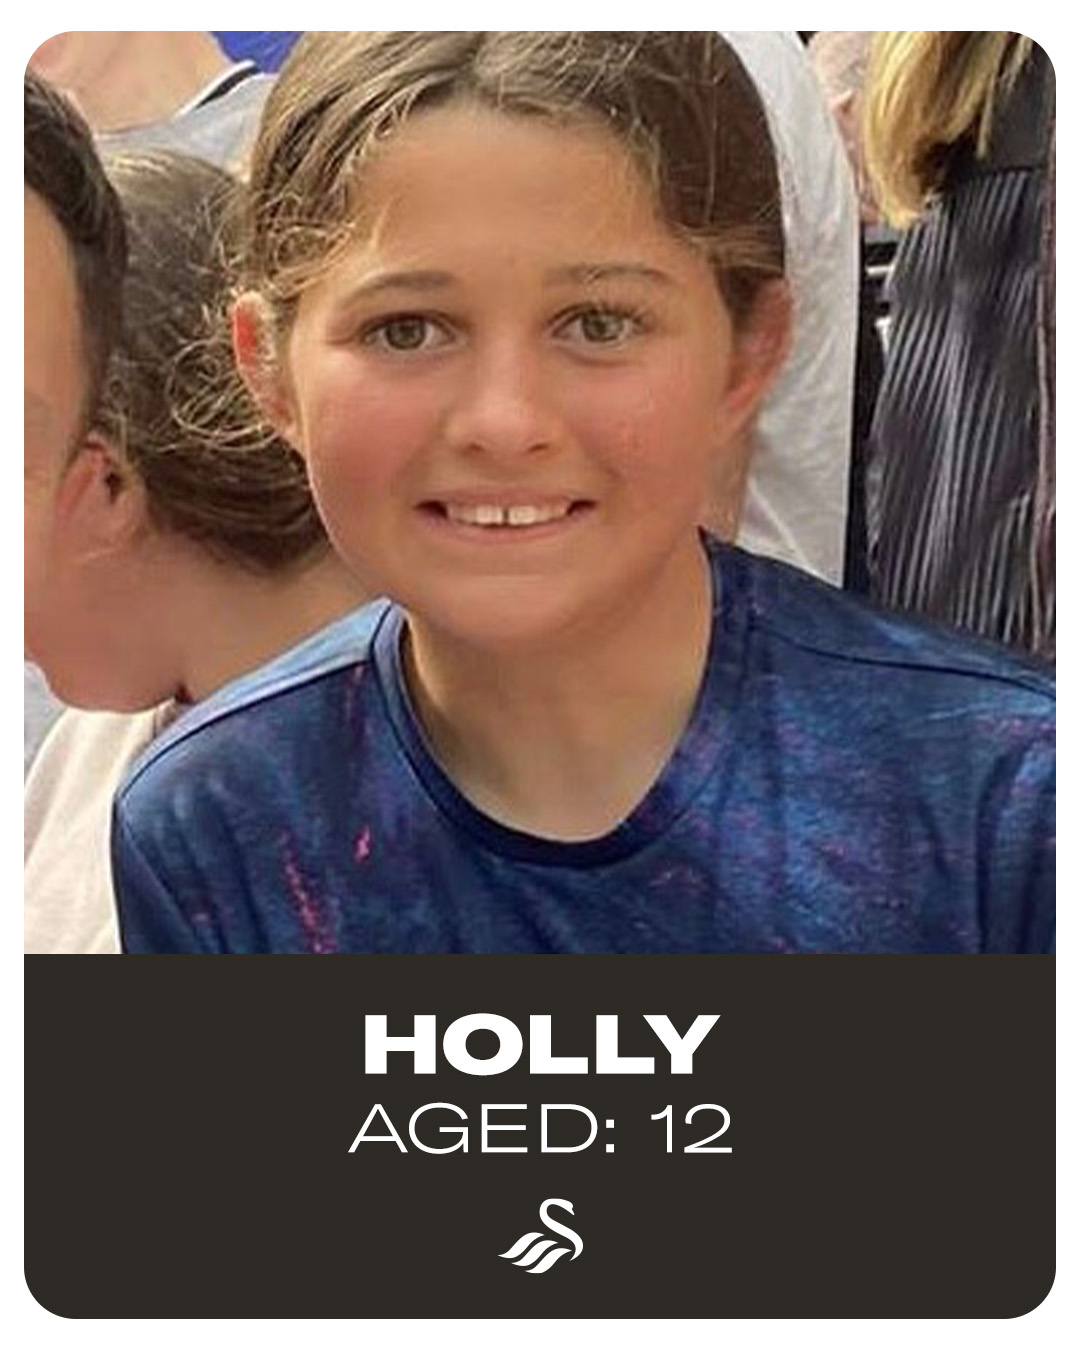 Photograph of Holly